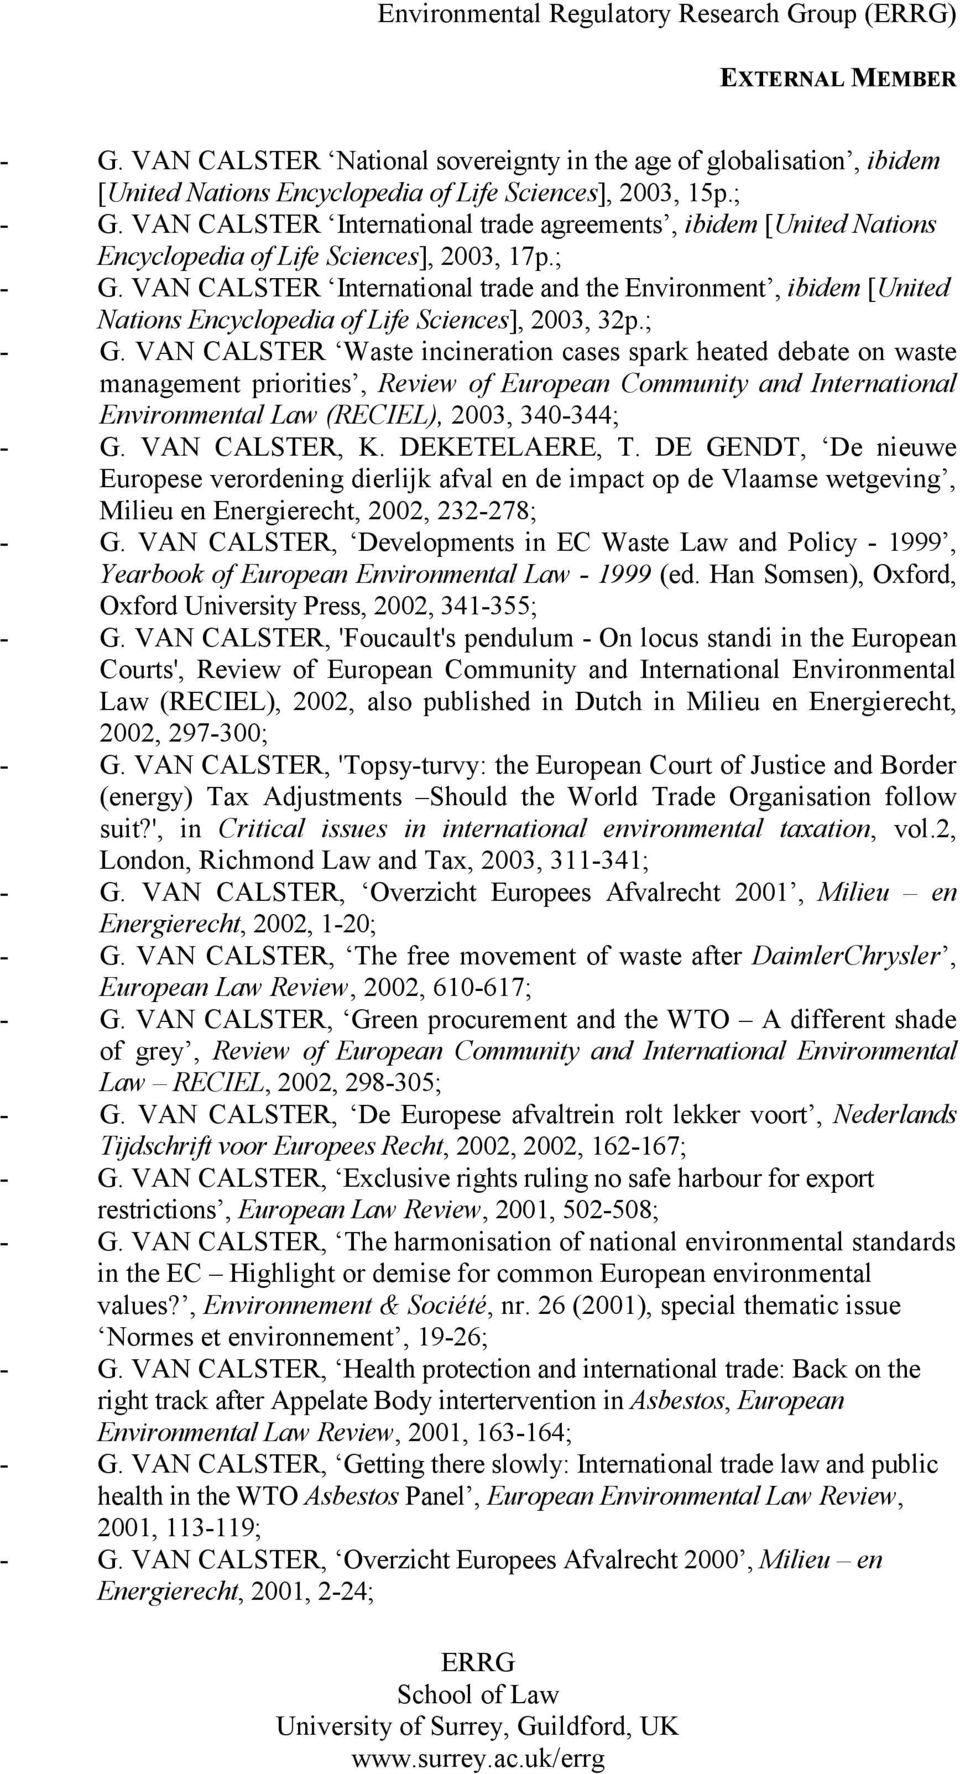 VAN CALSTER International trade and the Environment, ibidem [United Nations Encyclopedia of Life Sciences], 2003, 32p.; - G.